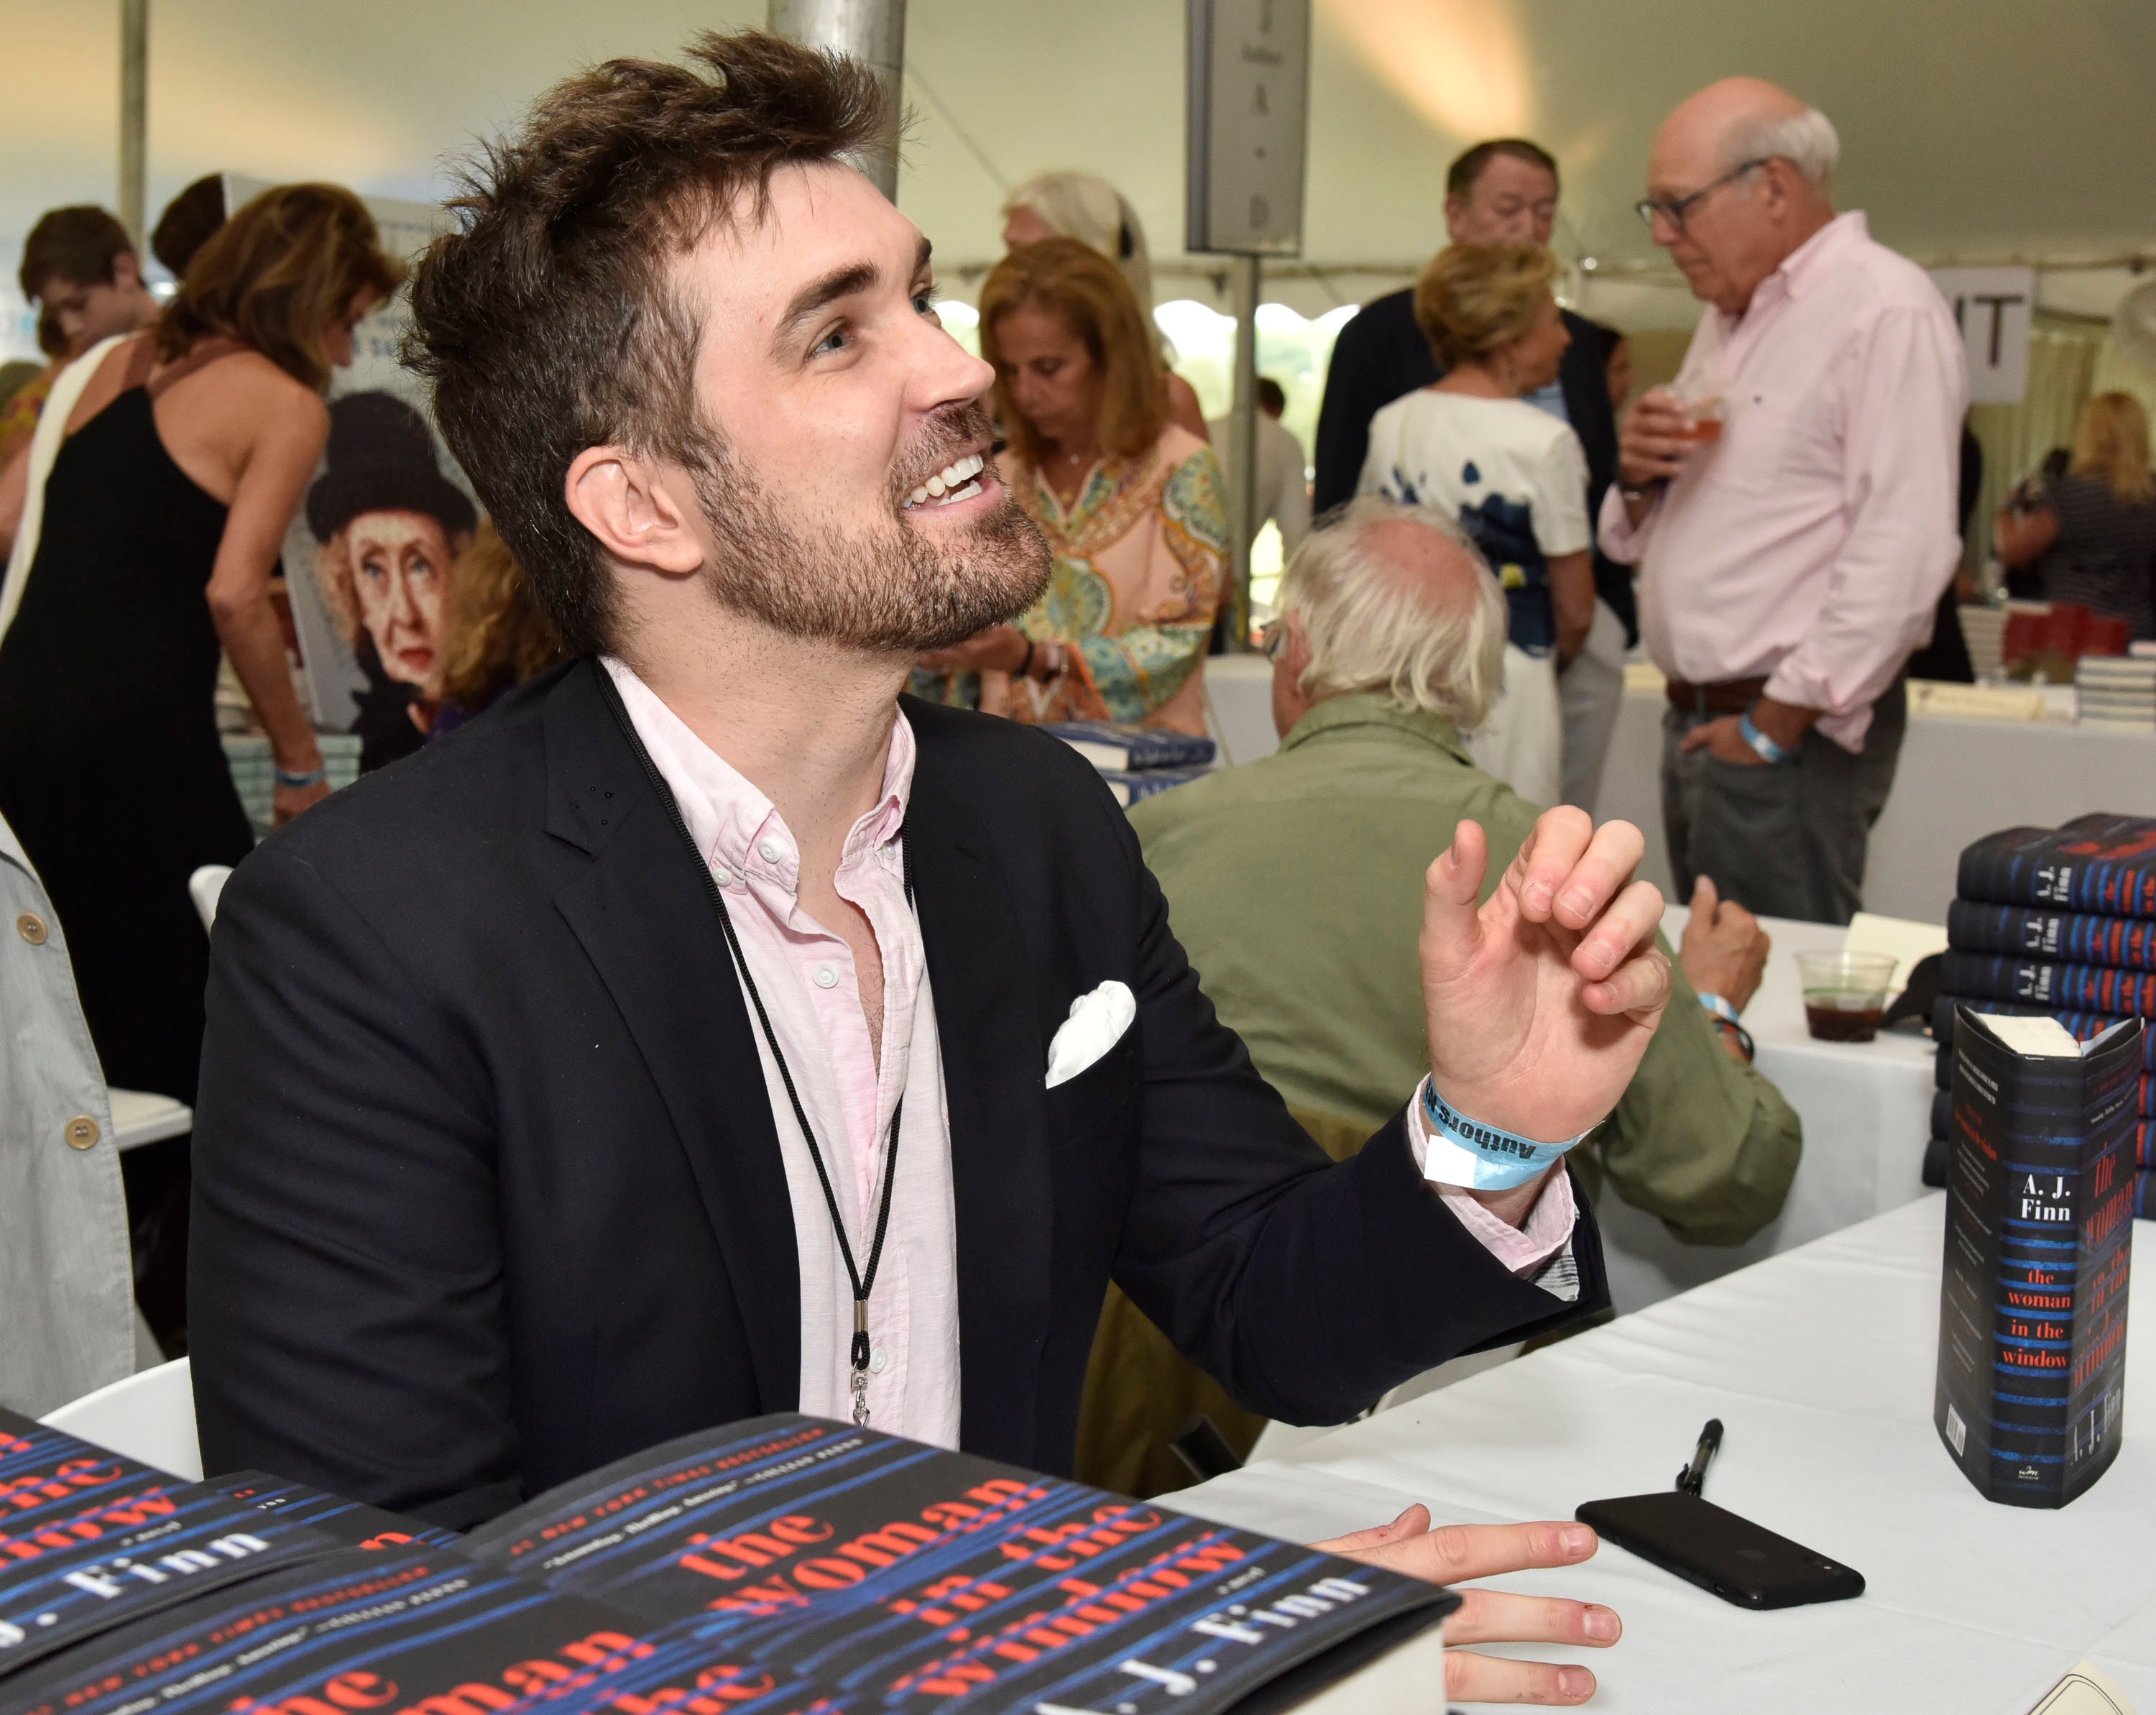 AJ Finn/Dan Mallory signs copies of the Woman in the Window at an event